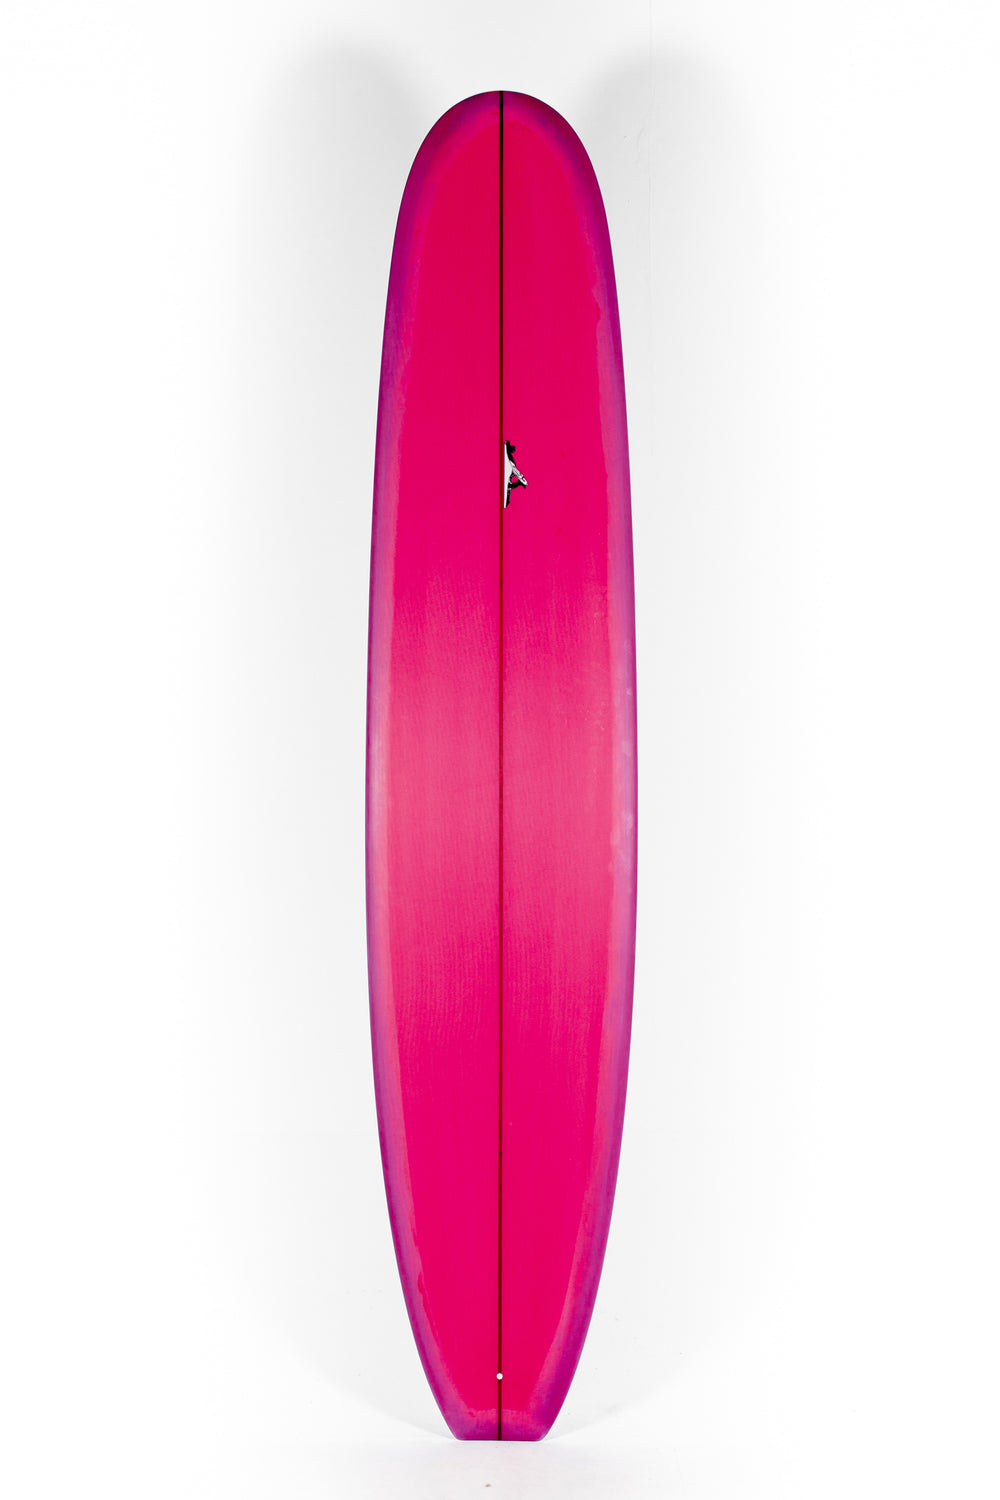 Pukas Surf Shop_Thomas Surfboards - SCOOP TAIL NOSERIDER - 9'4